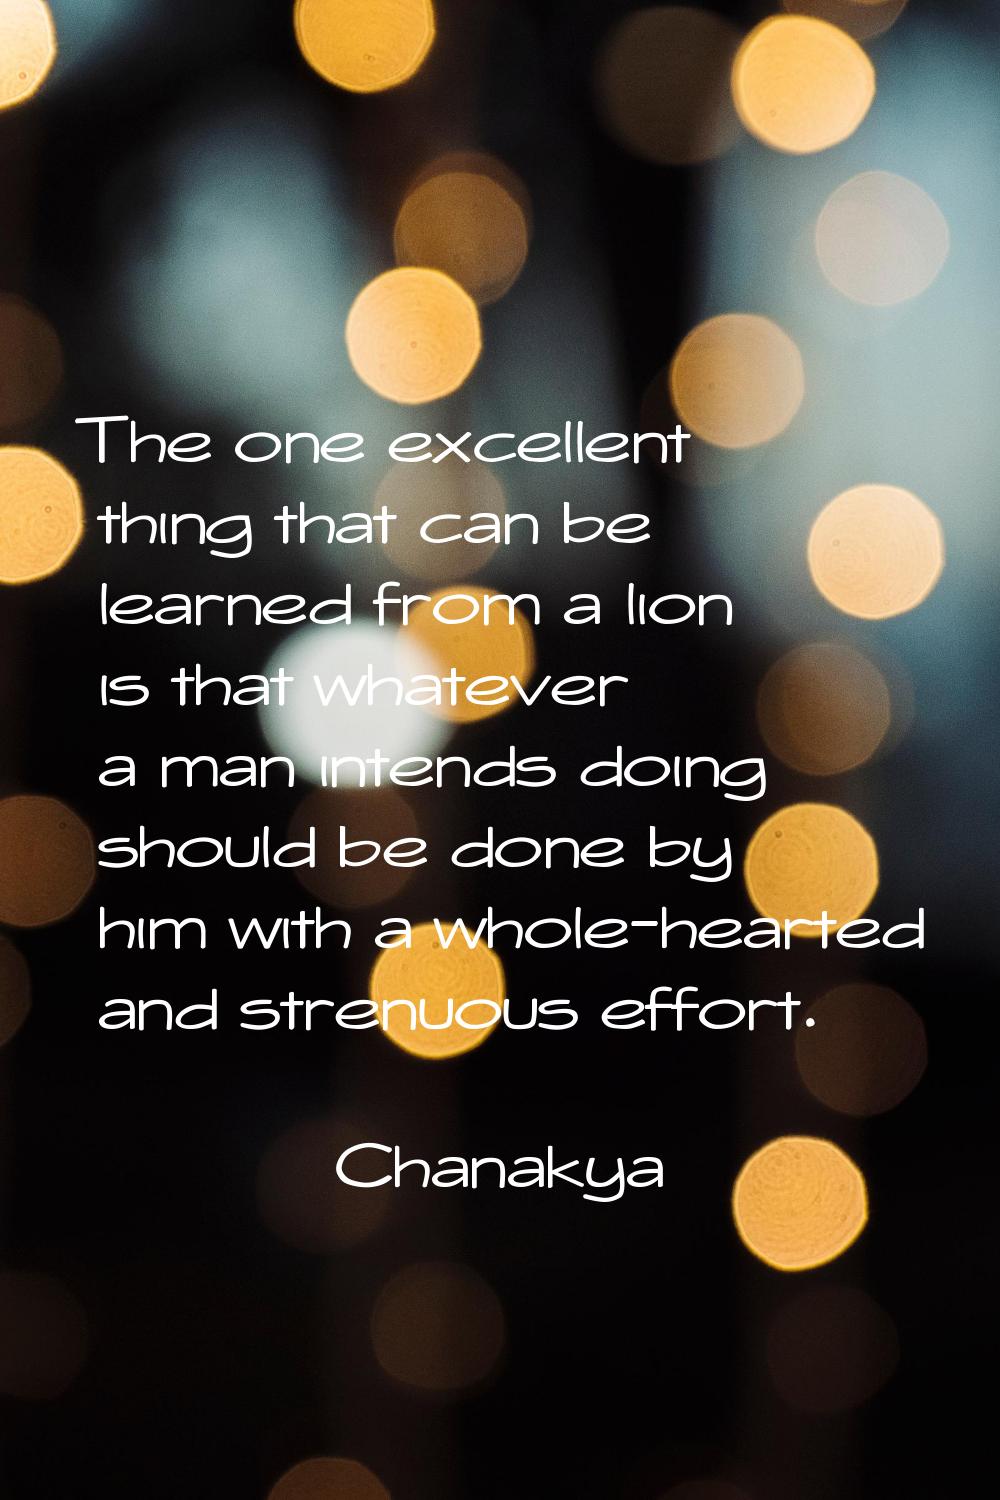 The one excellent thing that can be learned from a lion is that whatever a man intends doing should